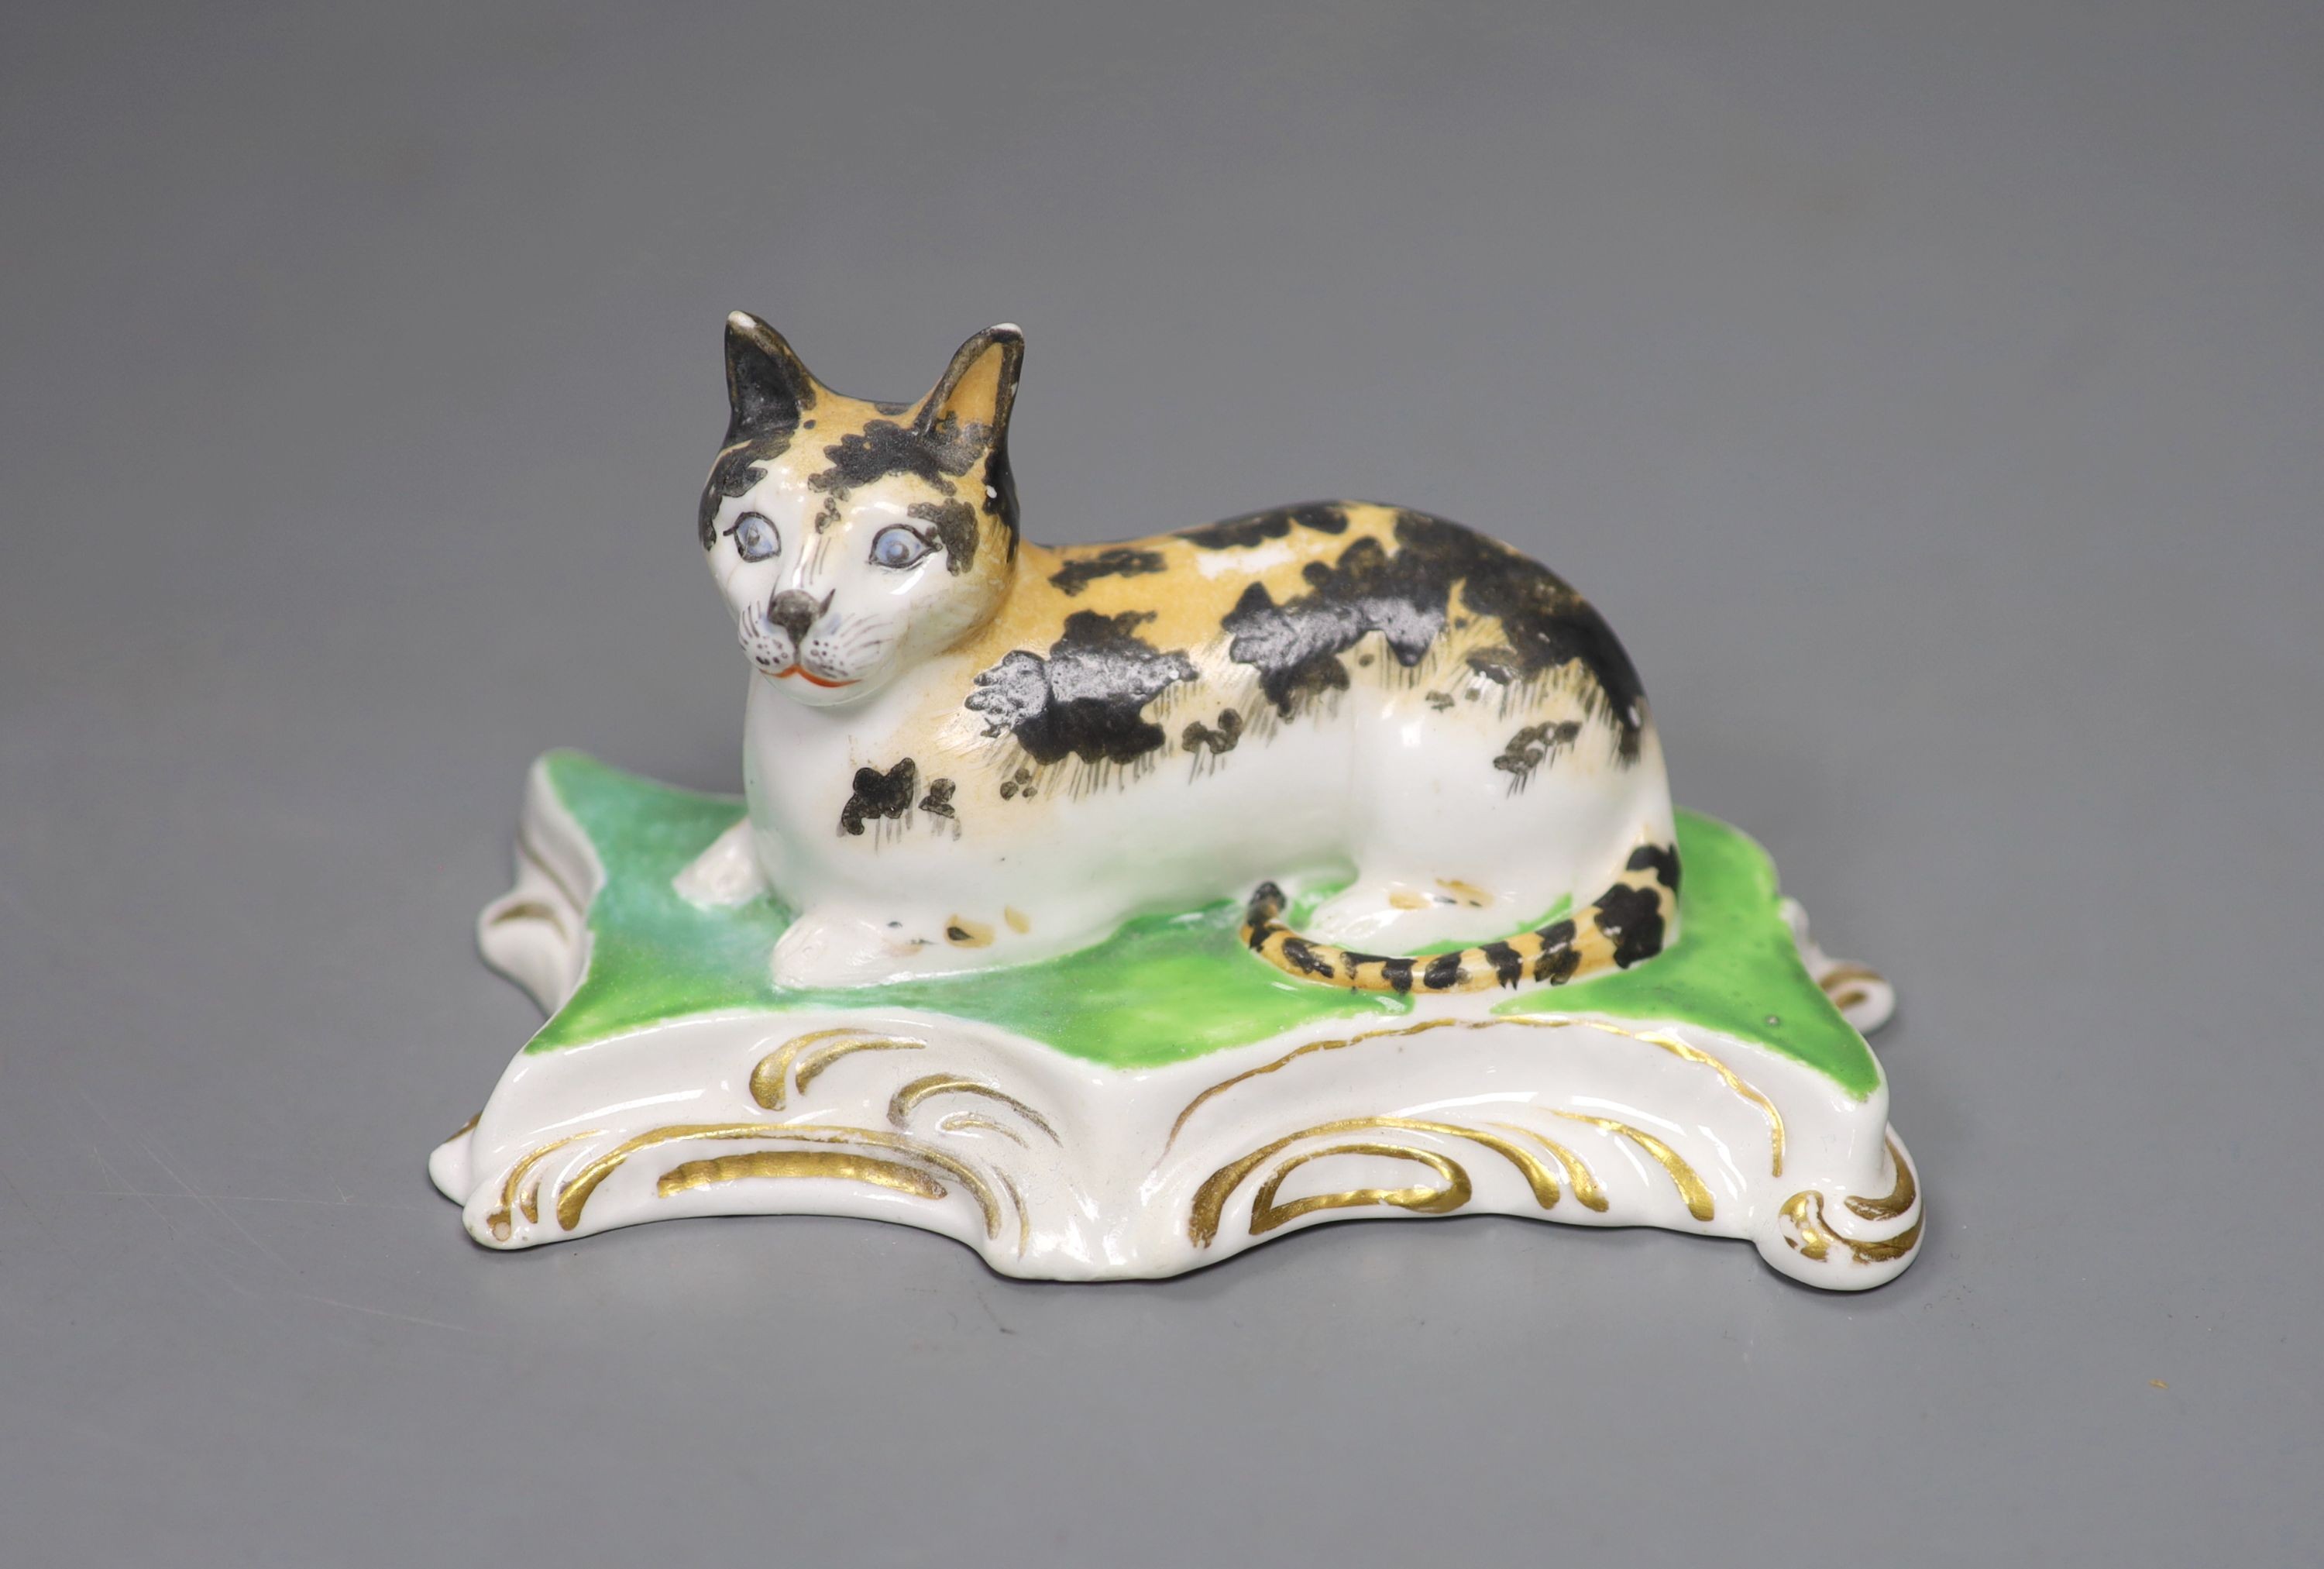 A rare Staffordshire porcelain figure of a recumbent tabby cat, c.1830-50, on a scroll work base, 11.5 cm long